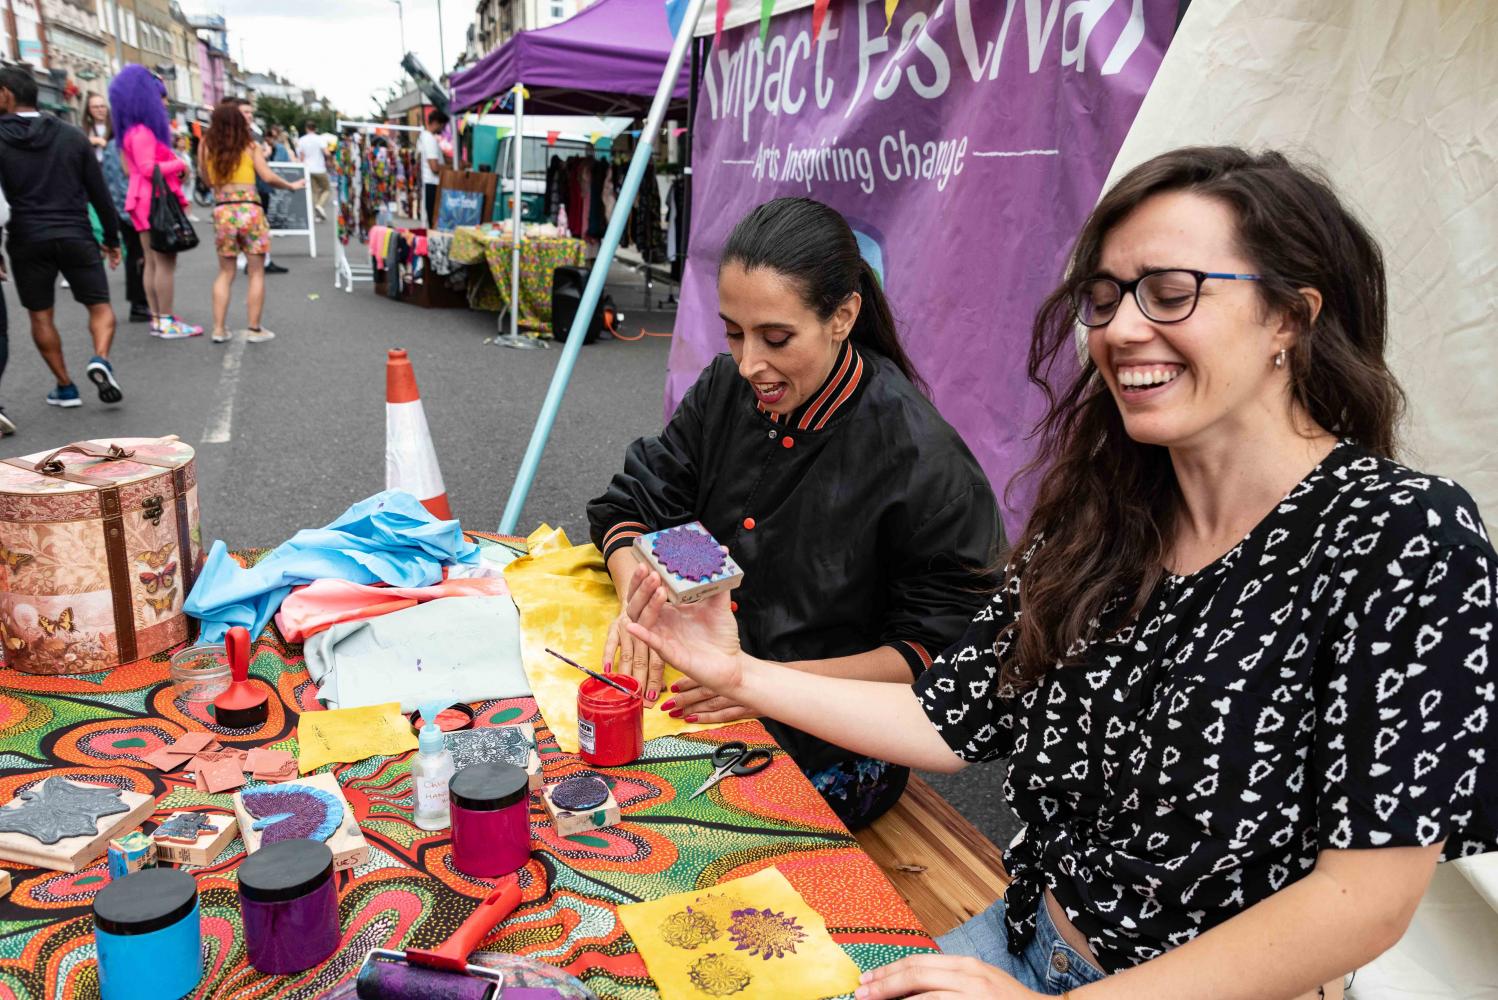 Two women take part in block printing at  a colourful table on the street